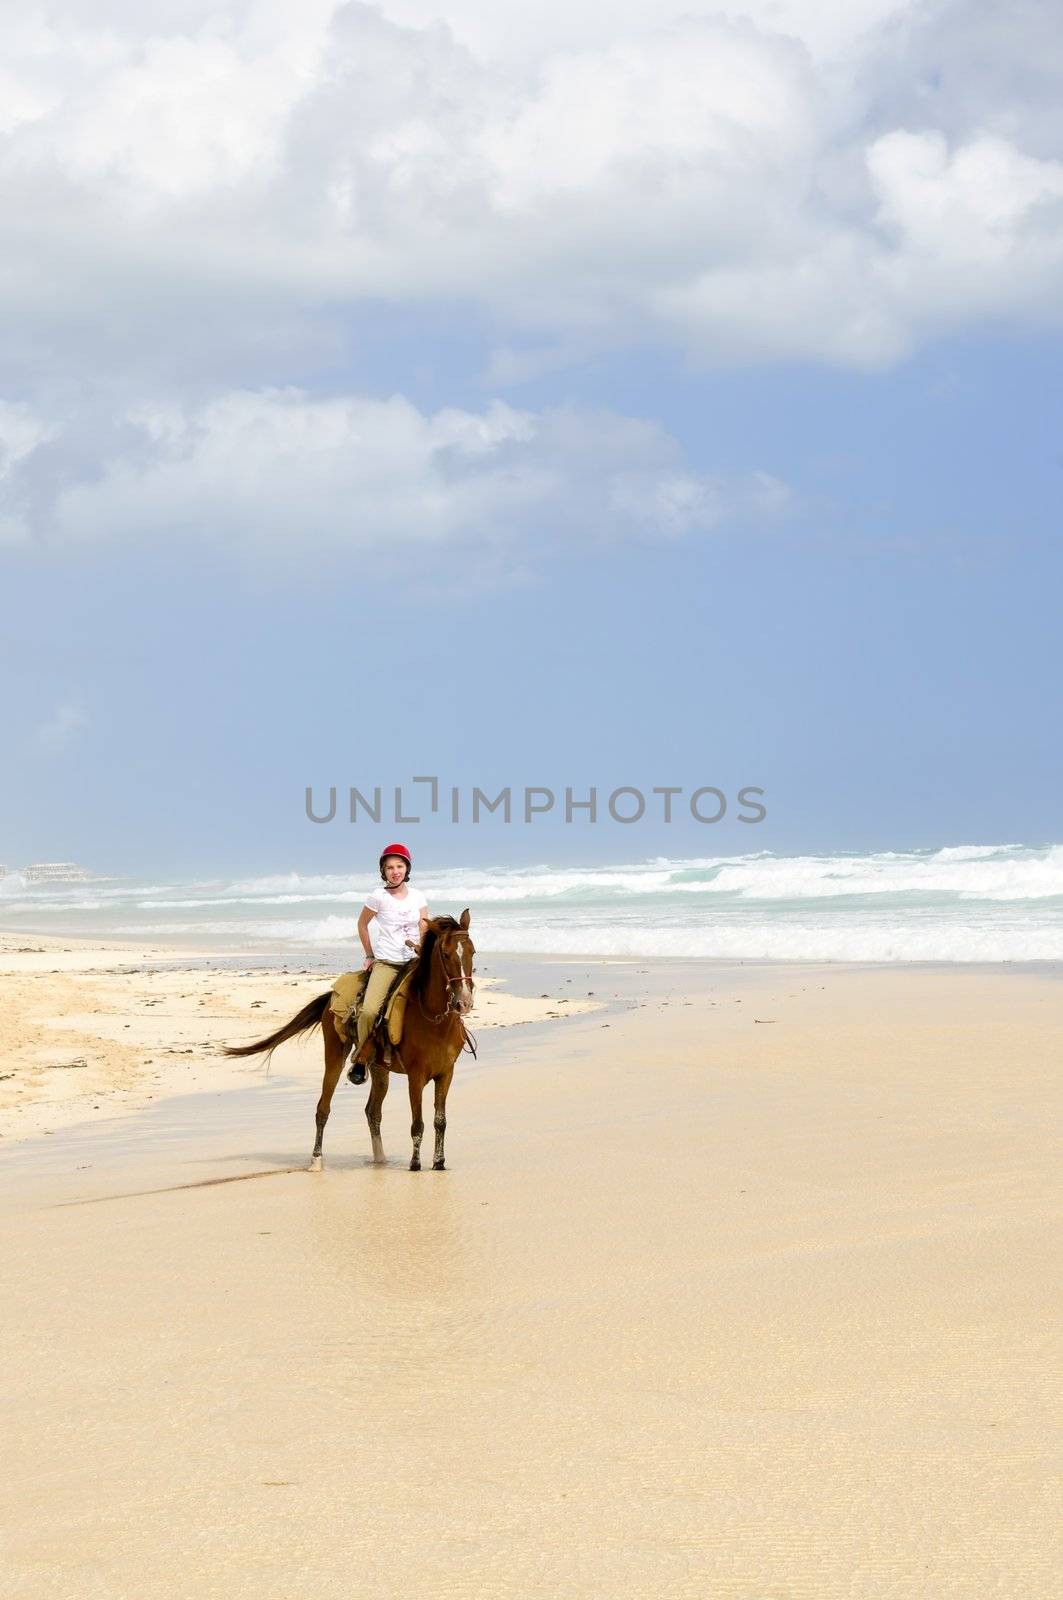 Girl riding horse on beach by elenathewise